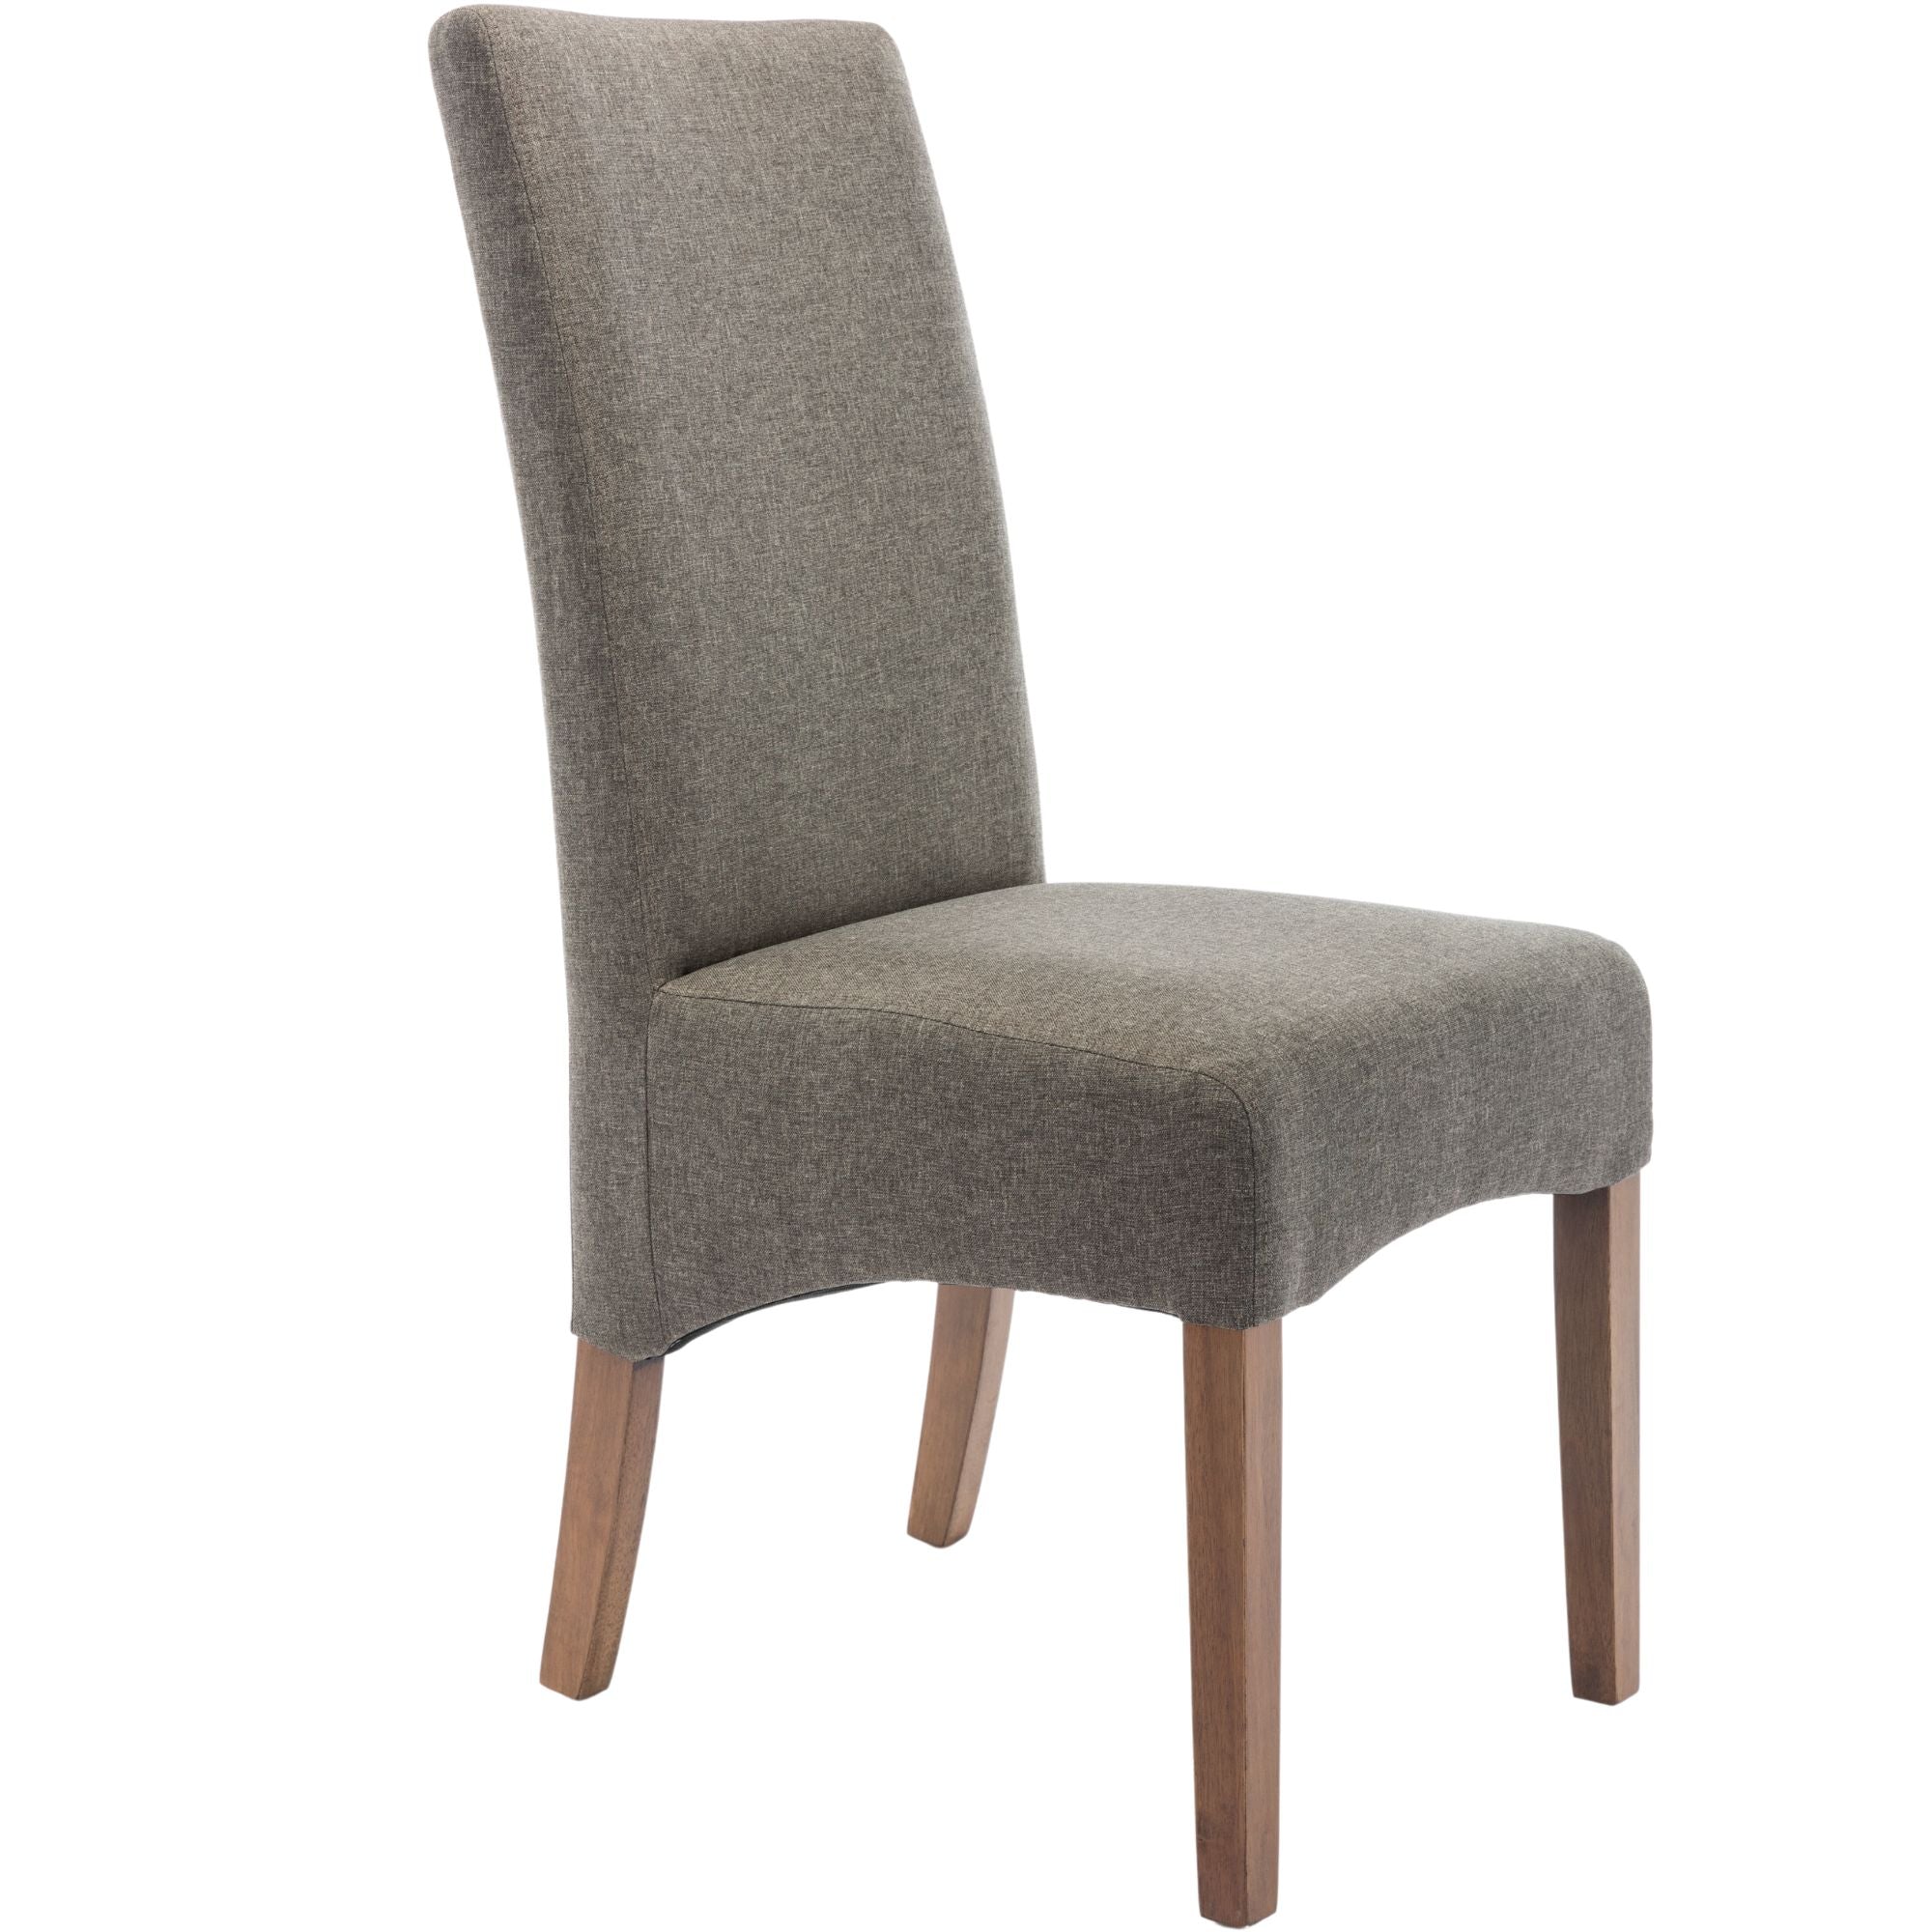 Aksa Fabric Upholstered Dining Chair Set of 4 Solid Pine Wood Furniture - Grey Deals499